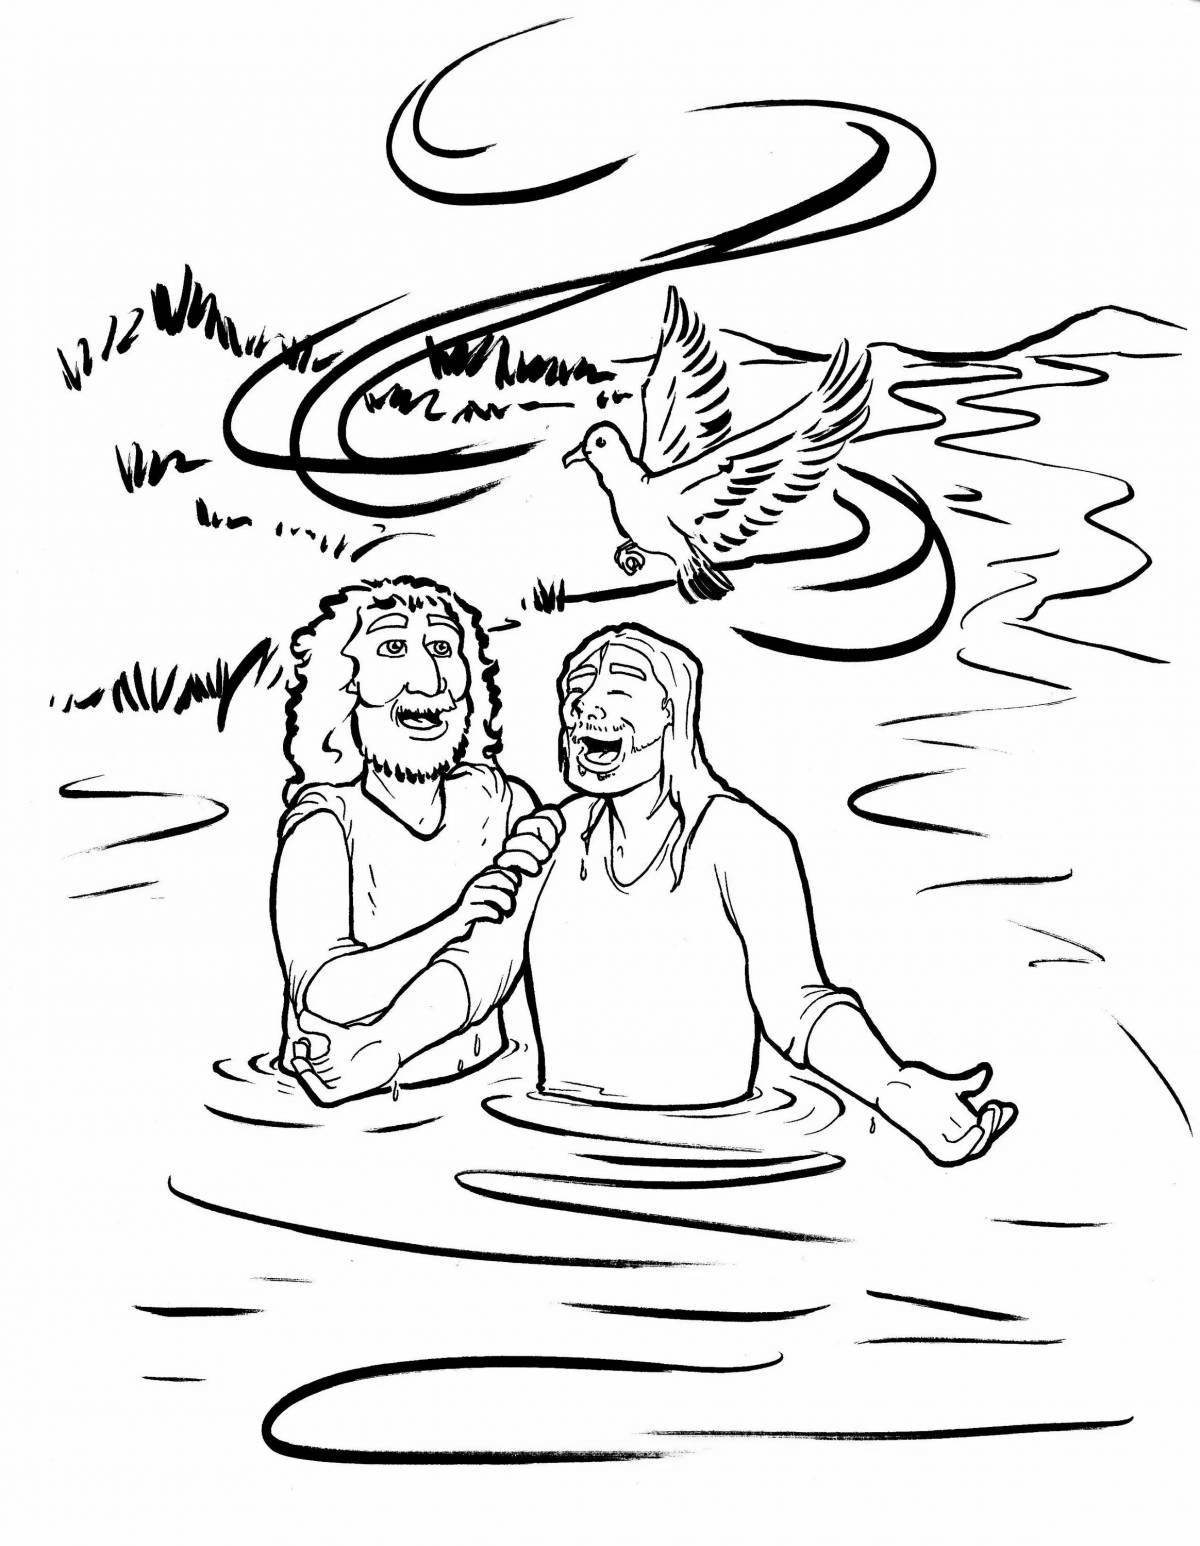 Coloring page of the glorious baptism of jesus